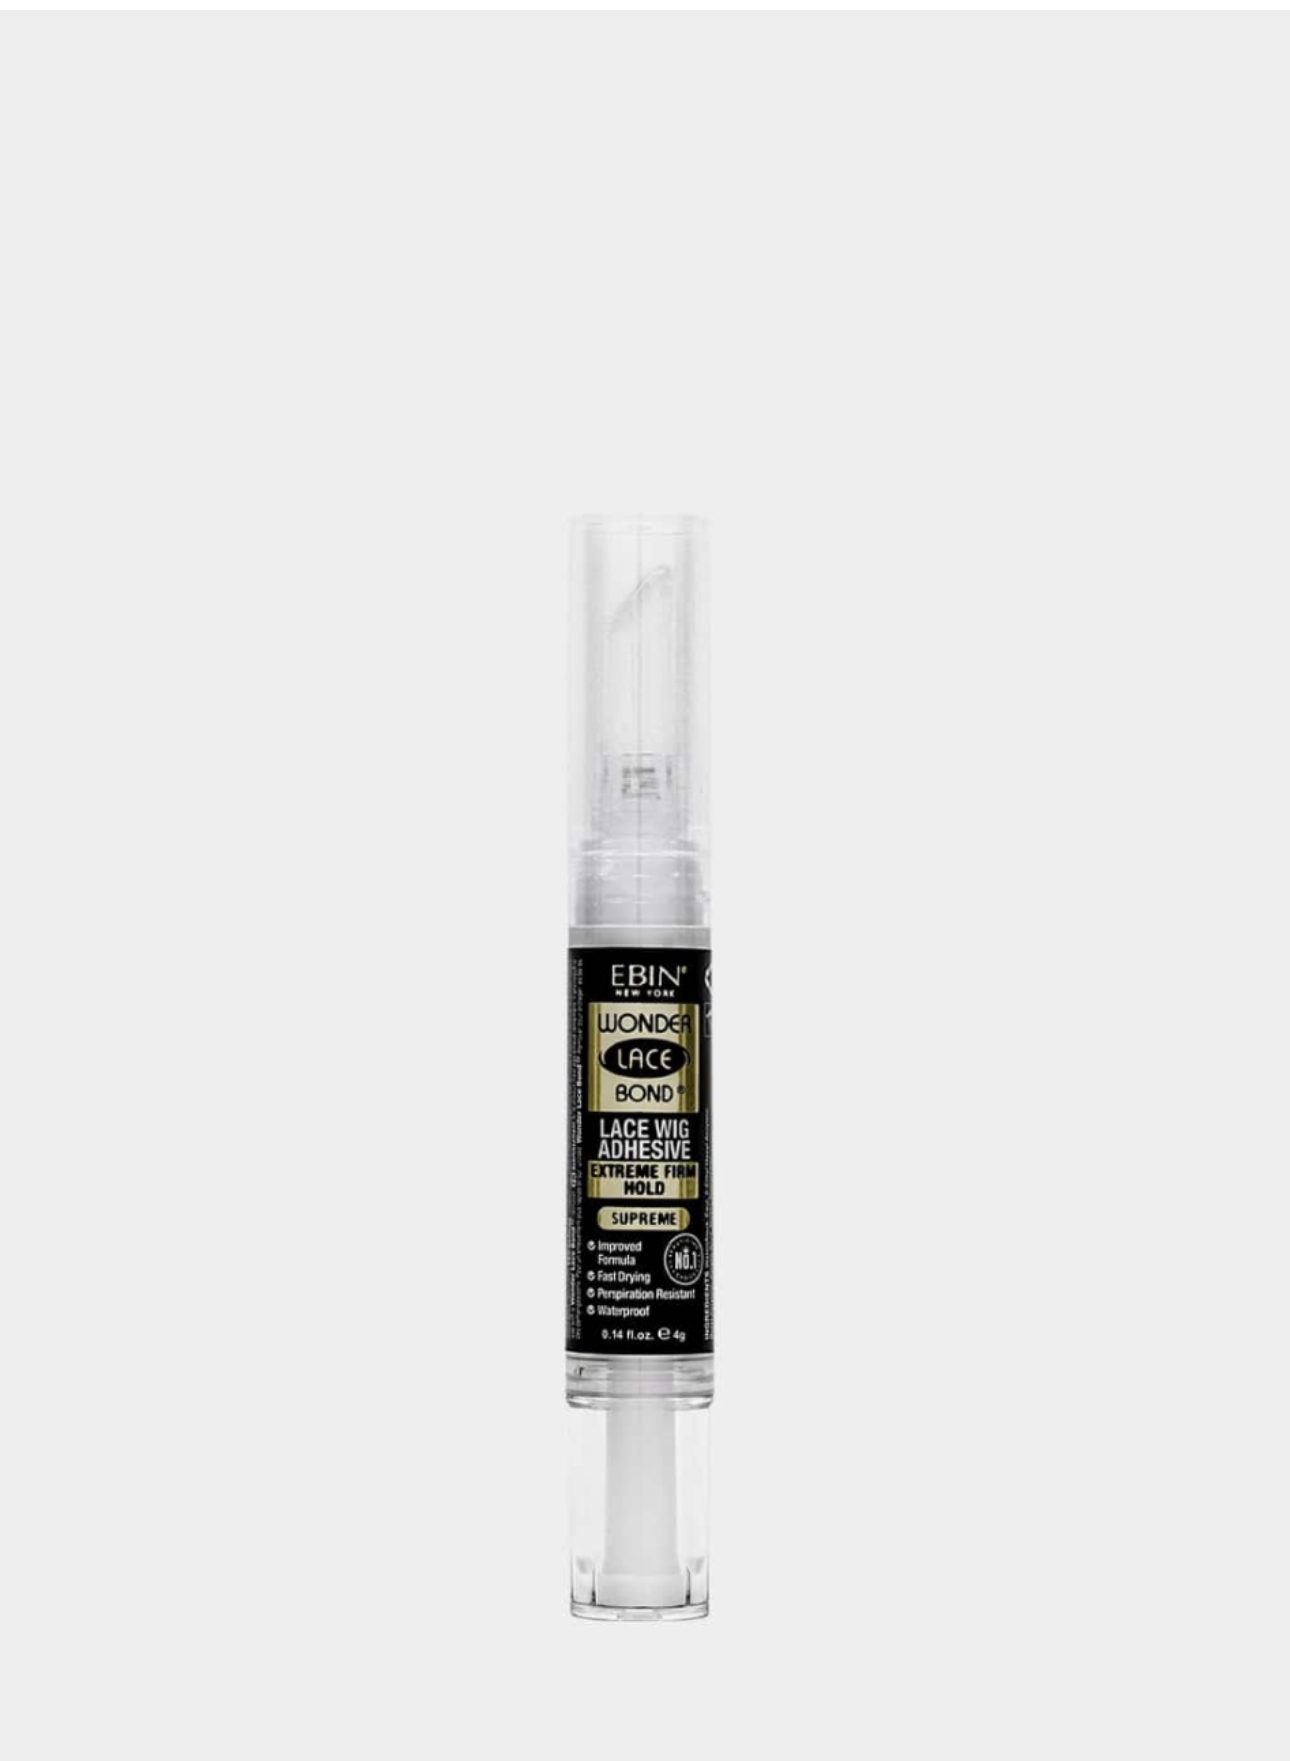 EBIN 4 EVER ULTIMATE GLUE - LACE HOLDING GLUE HOLD EXTREME FIRM